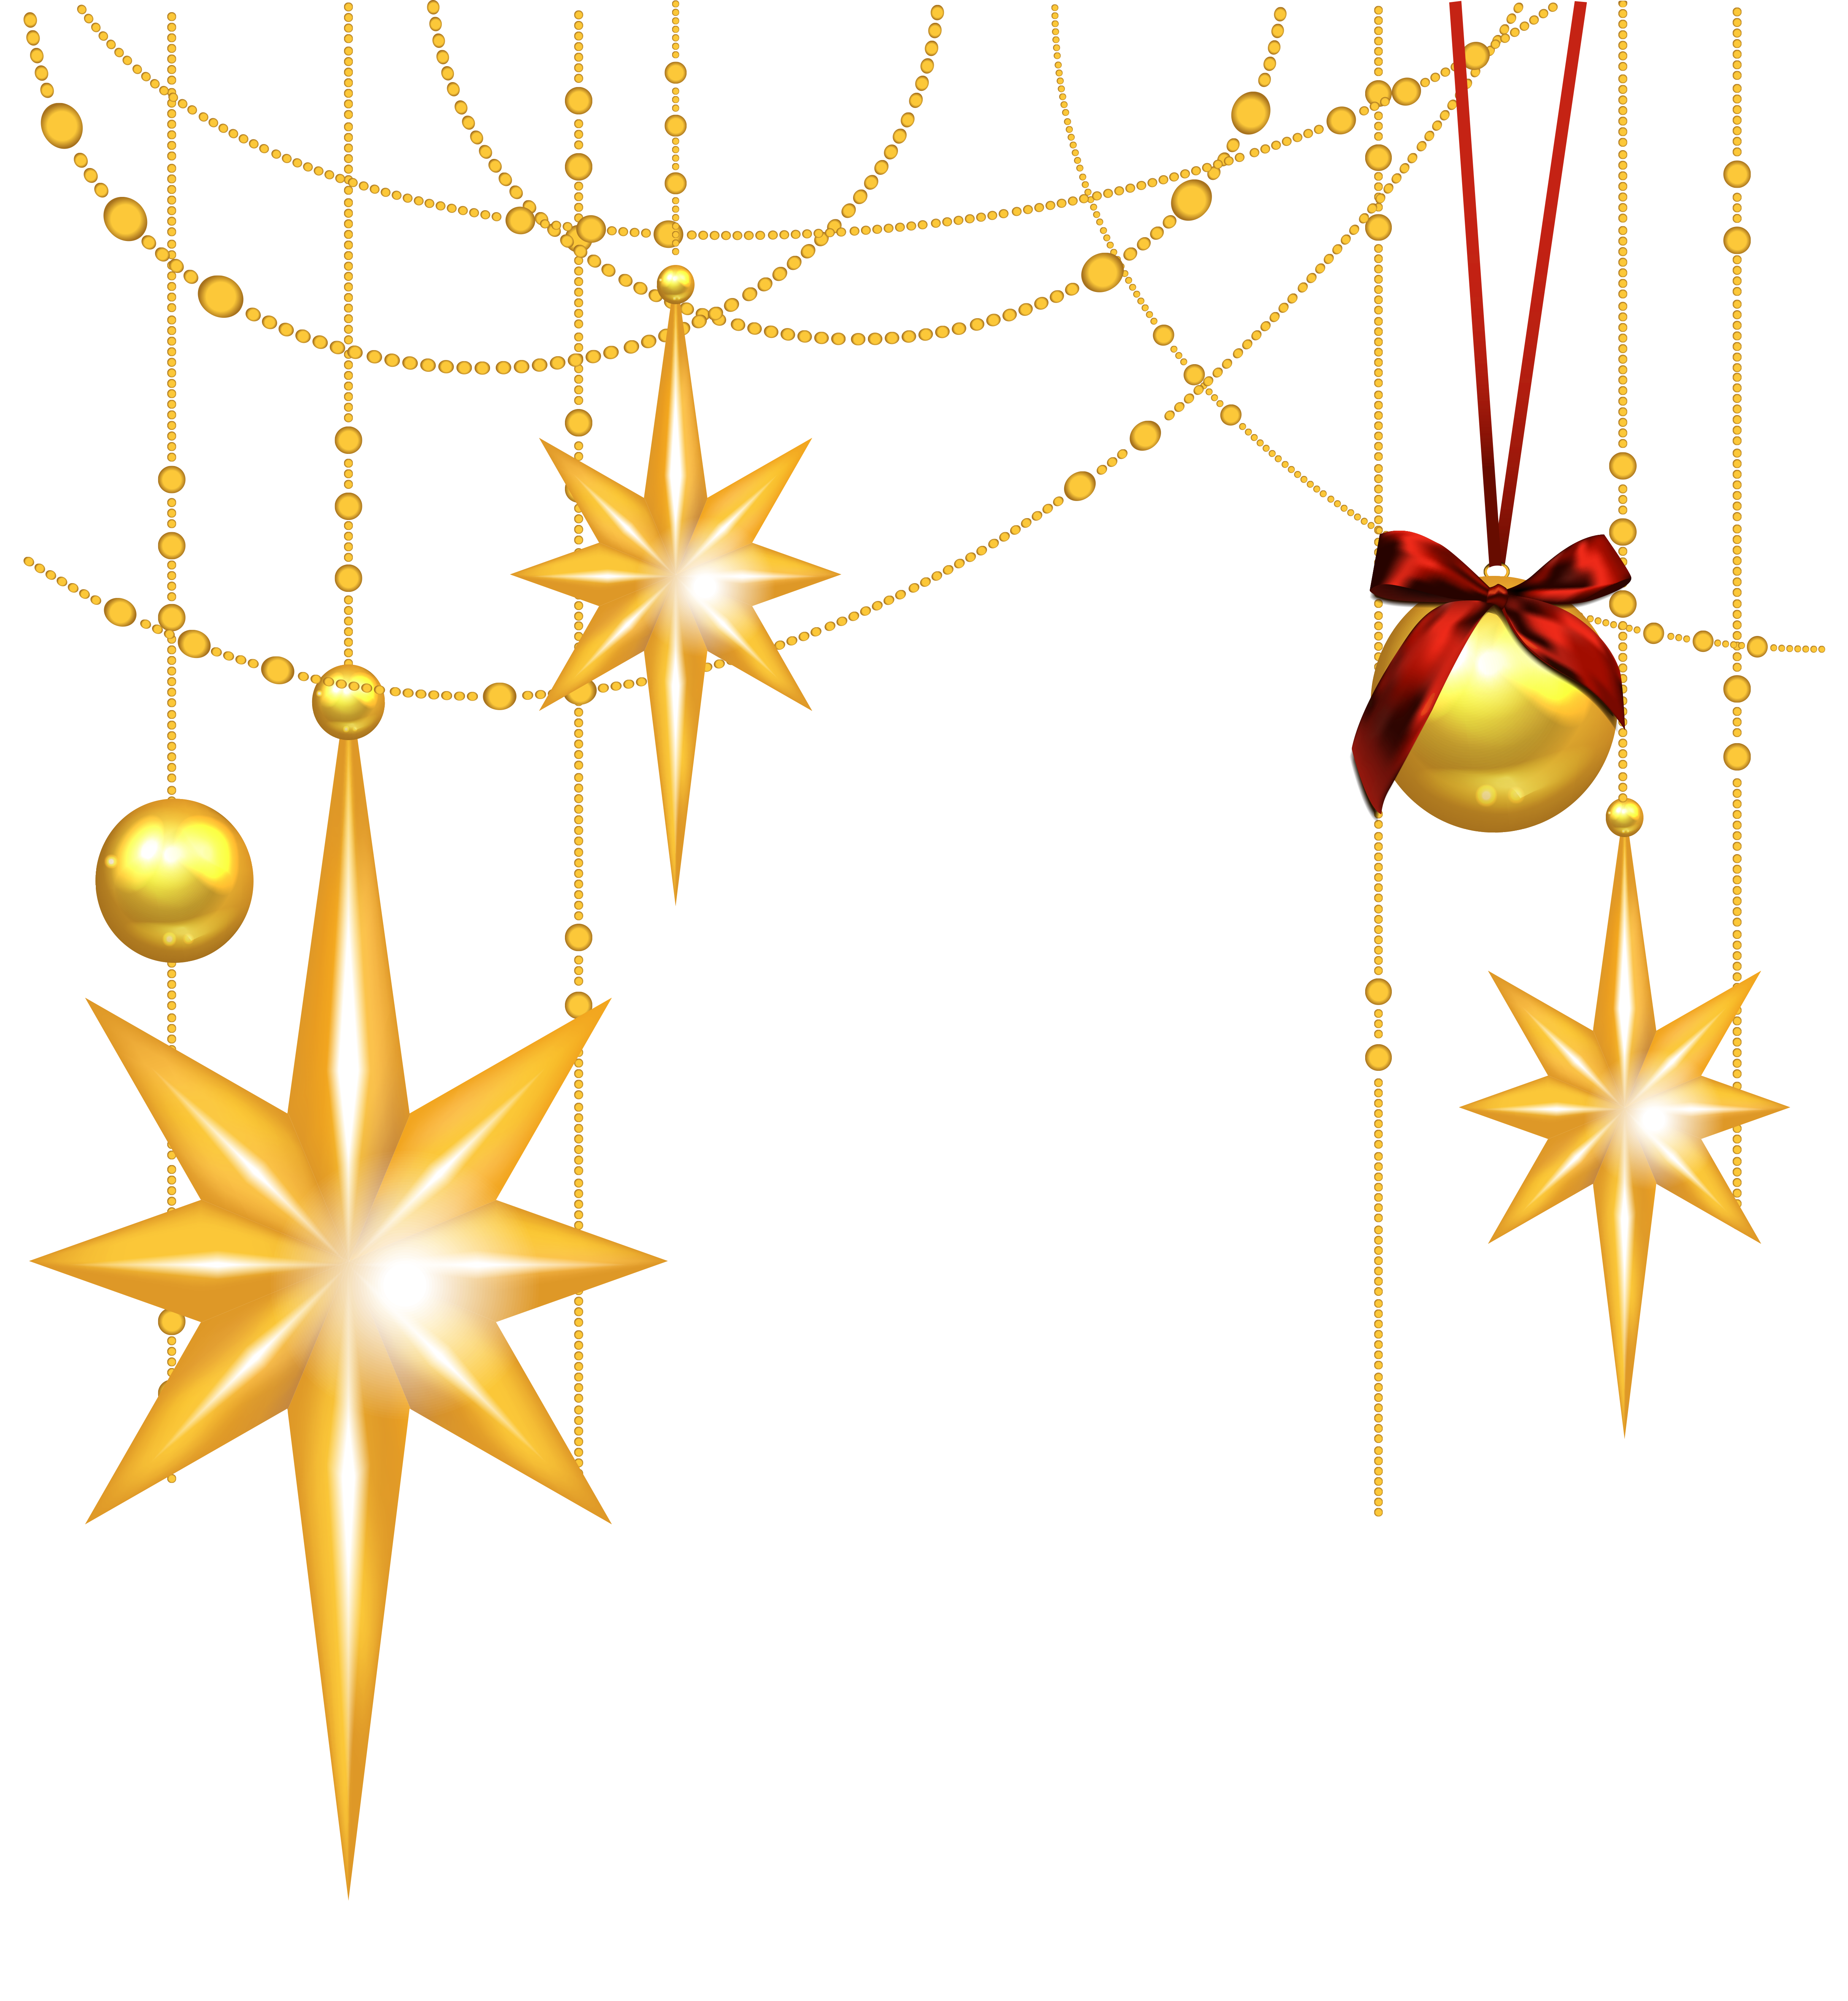 Free Christmas Stars Png, Download Free Clip Art, Free Clip Art on